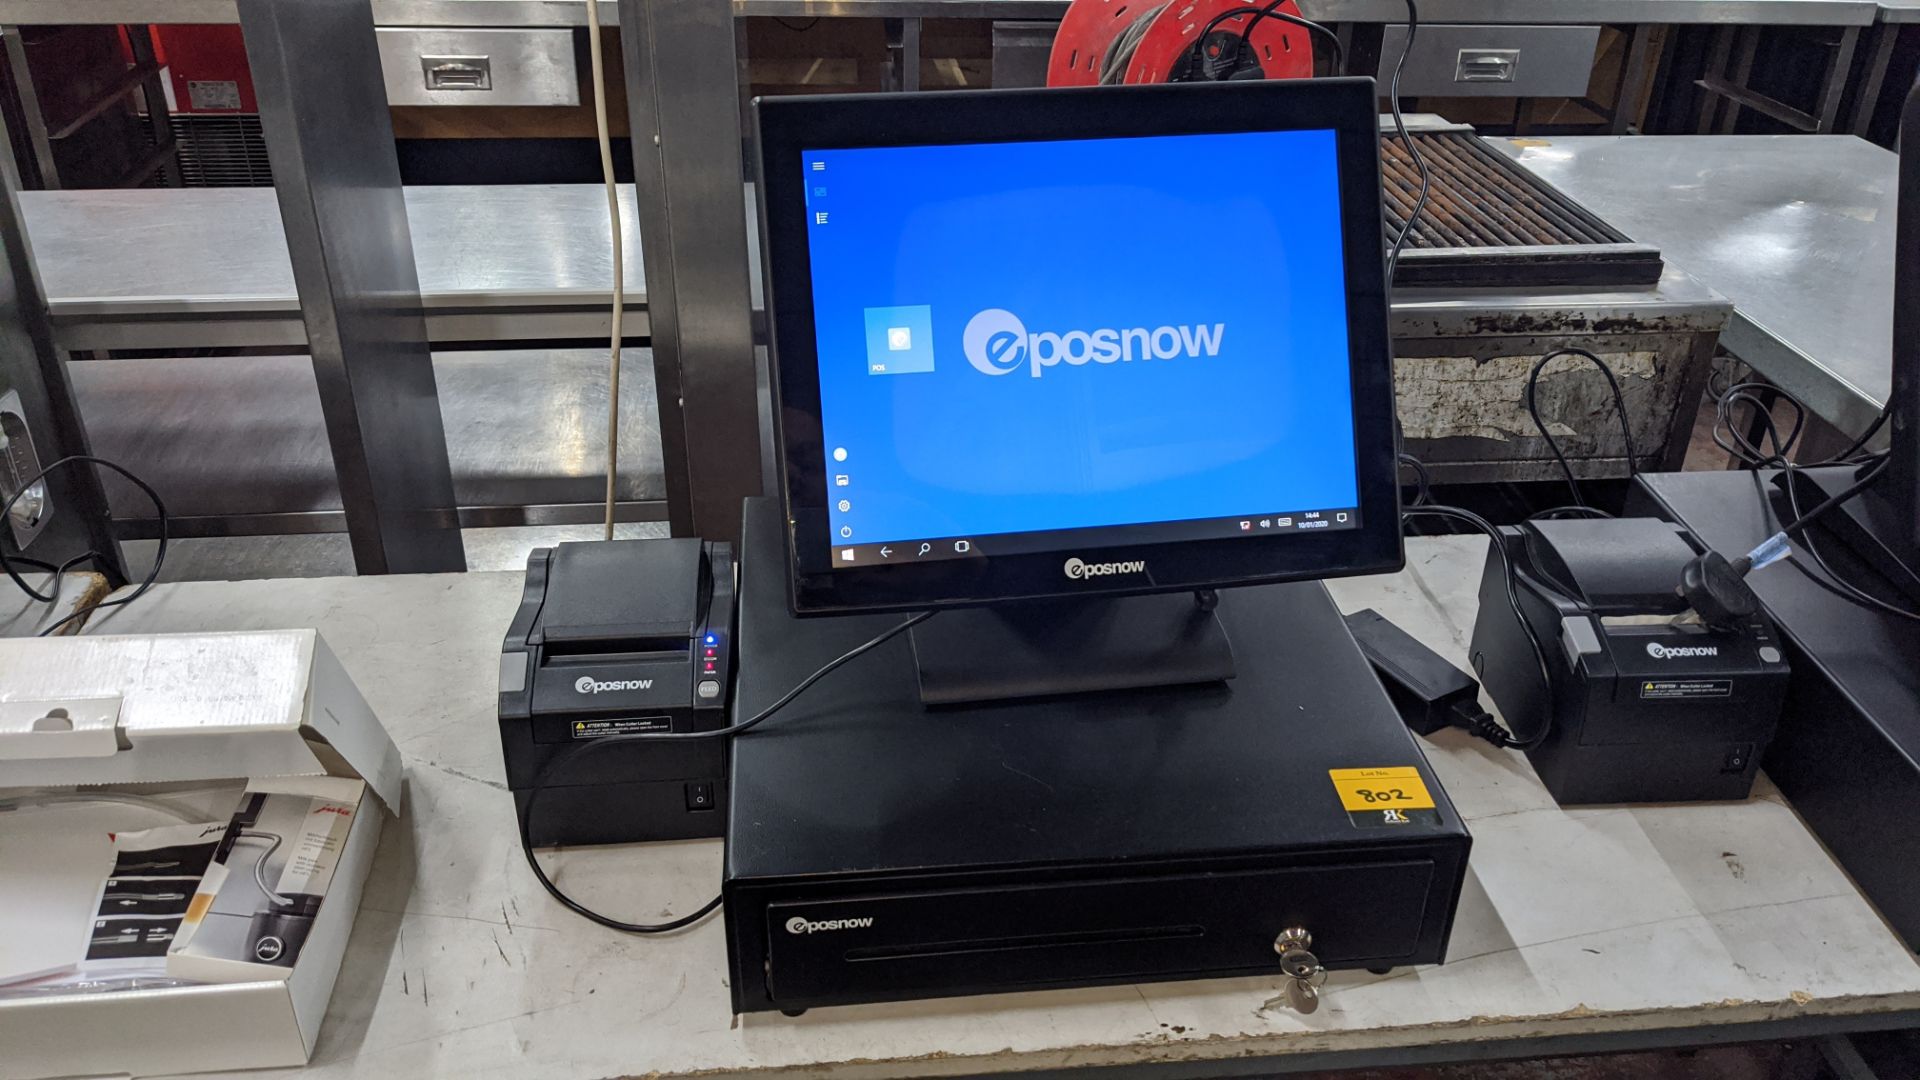 EPOS system comprising EPOSNOW touchscreen terminal with built-in card reader model Pro-C15, EPOSNOW - Image 2 of 12